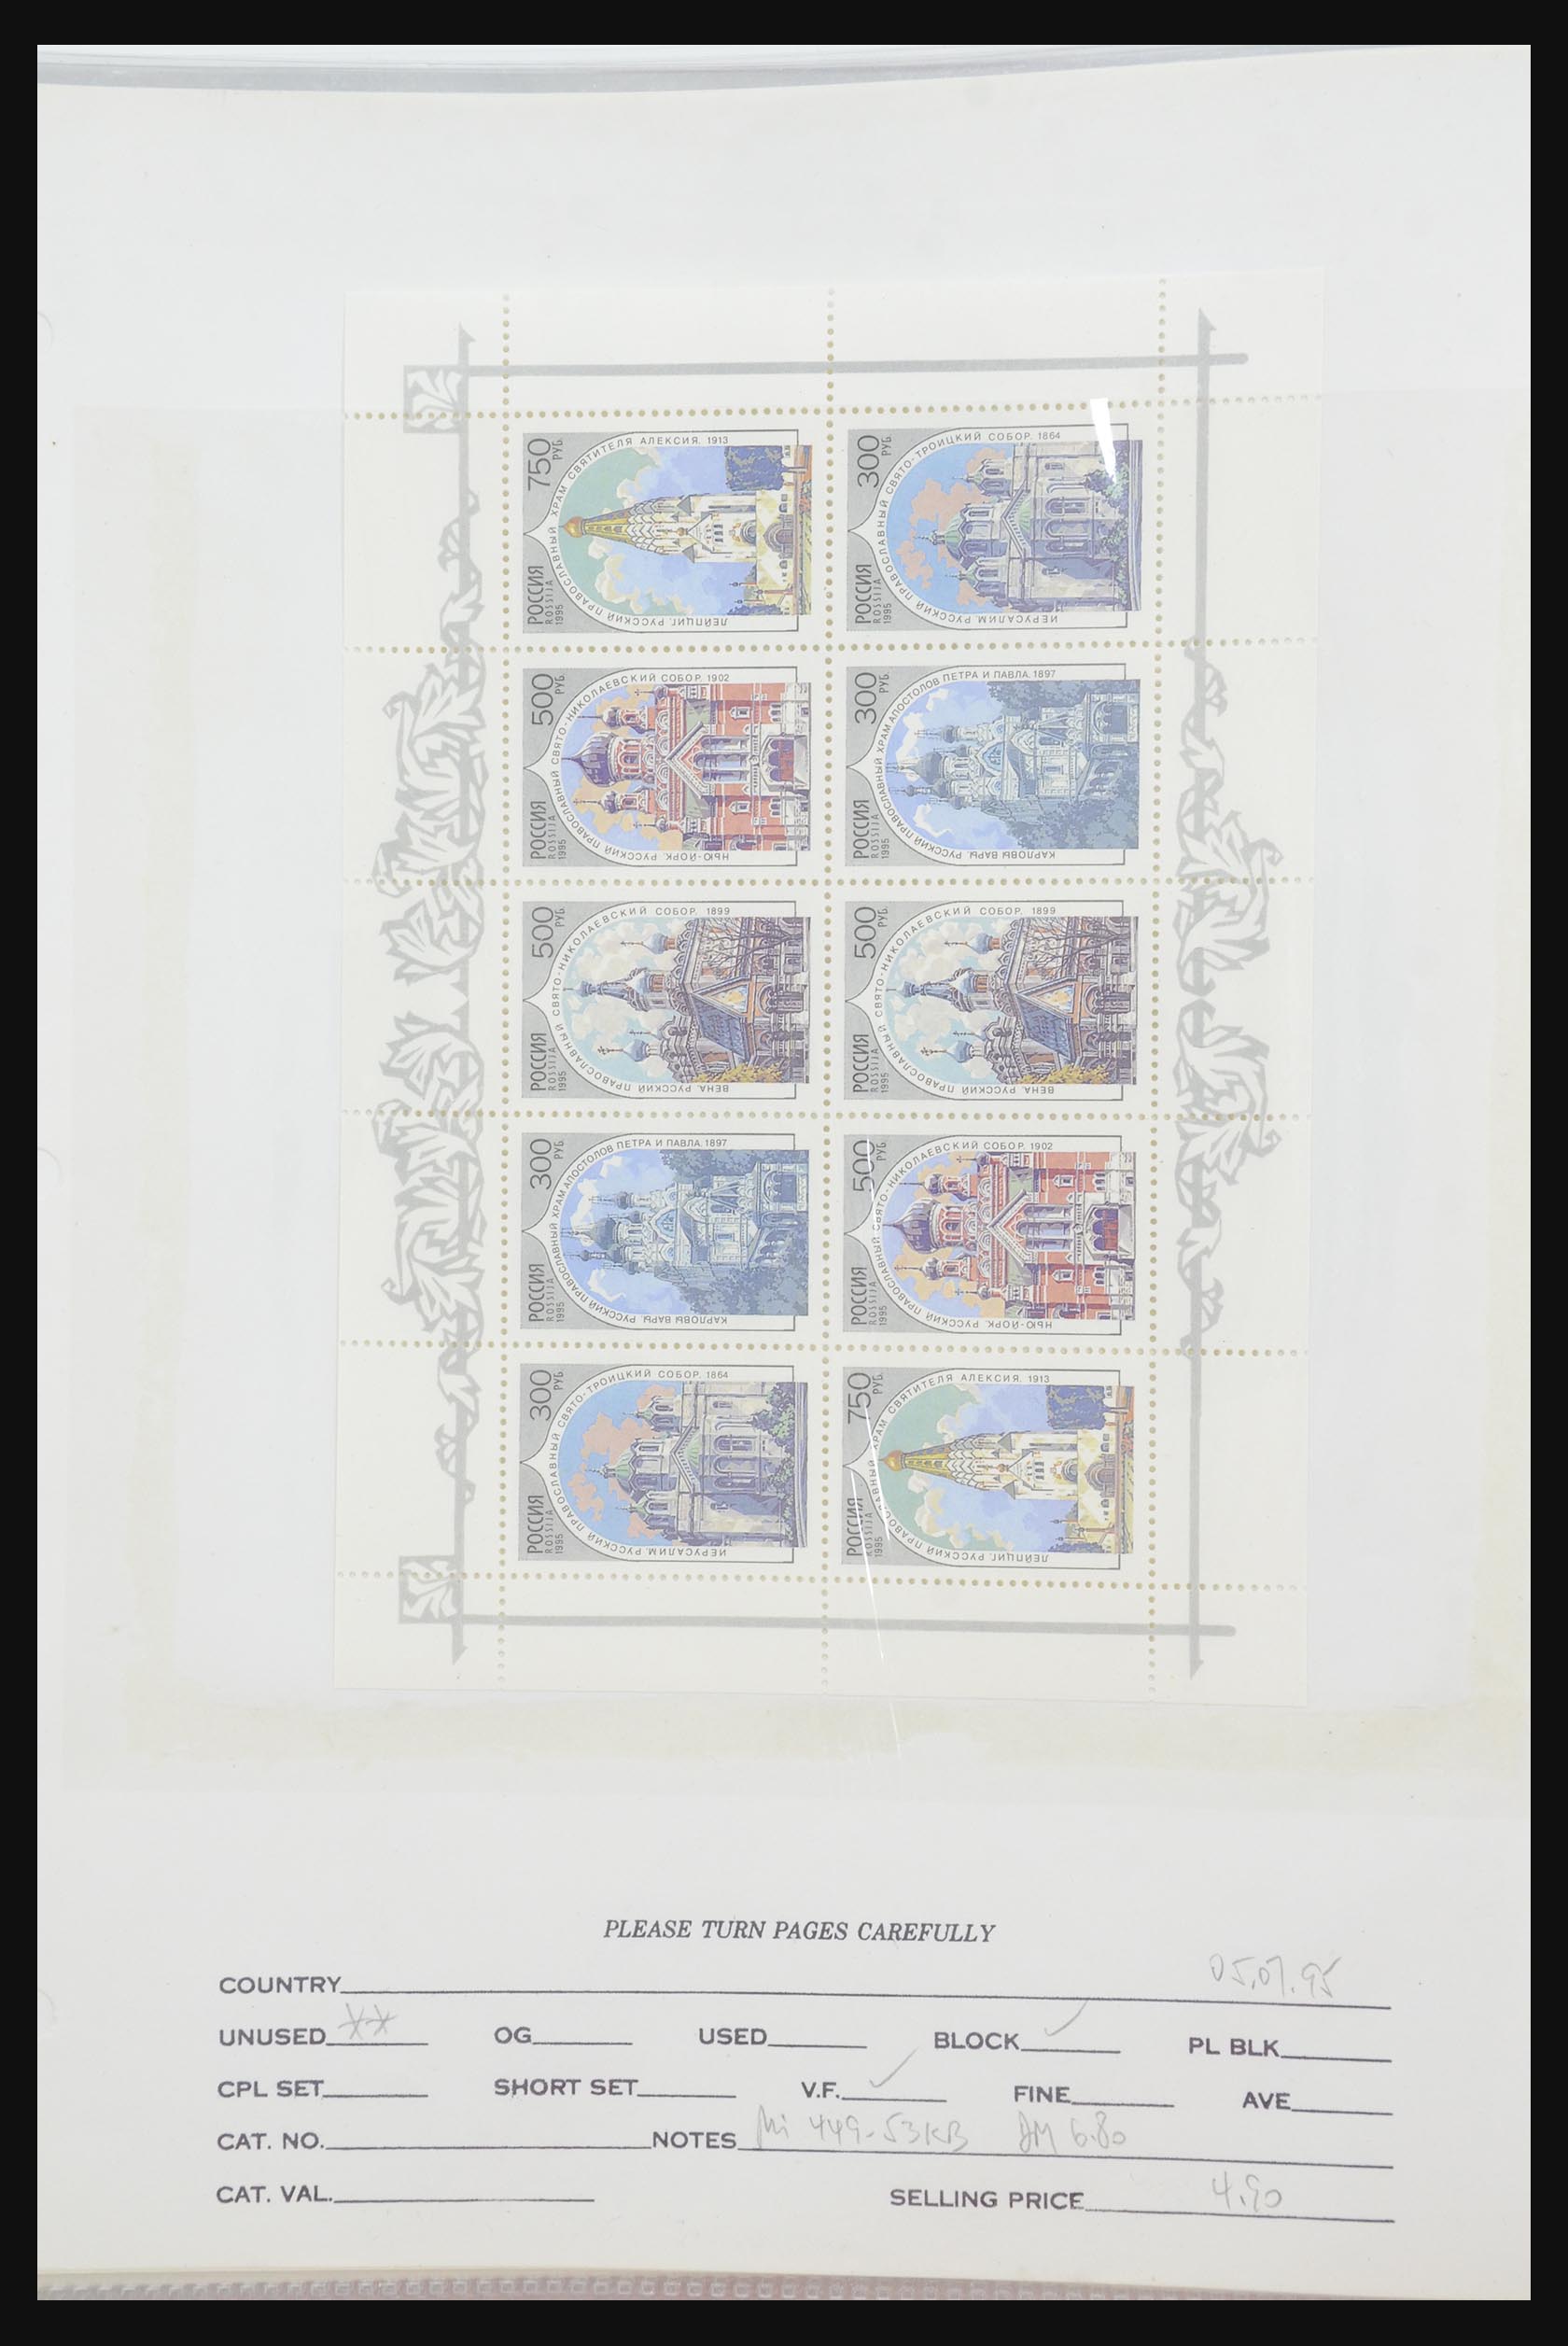 31915 140 - 31915 Western Europe souvenir sheets and stamp booklets on FDC.